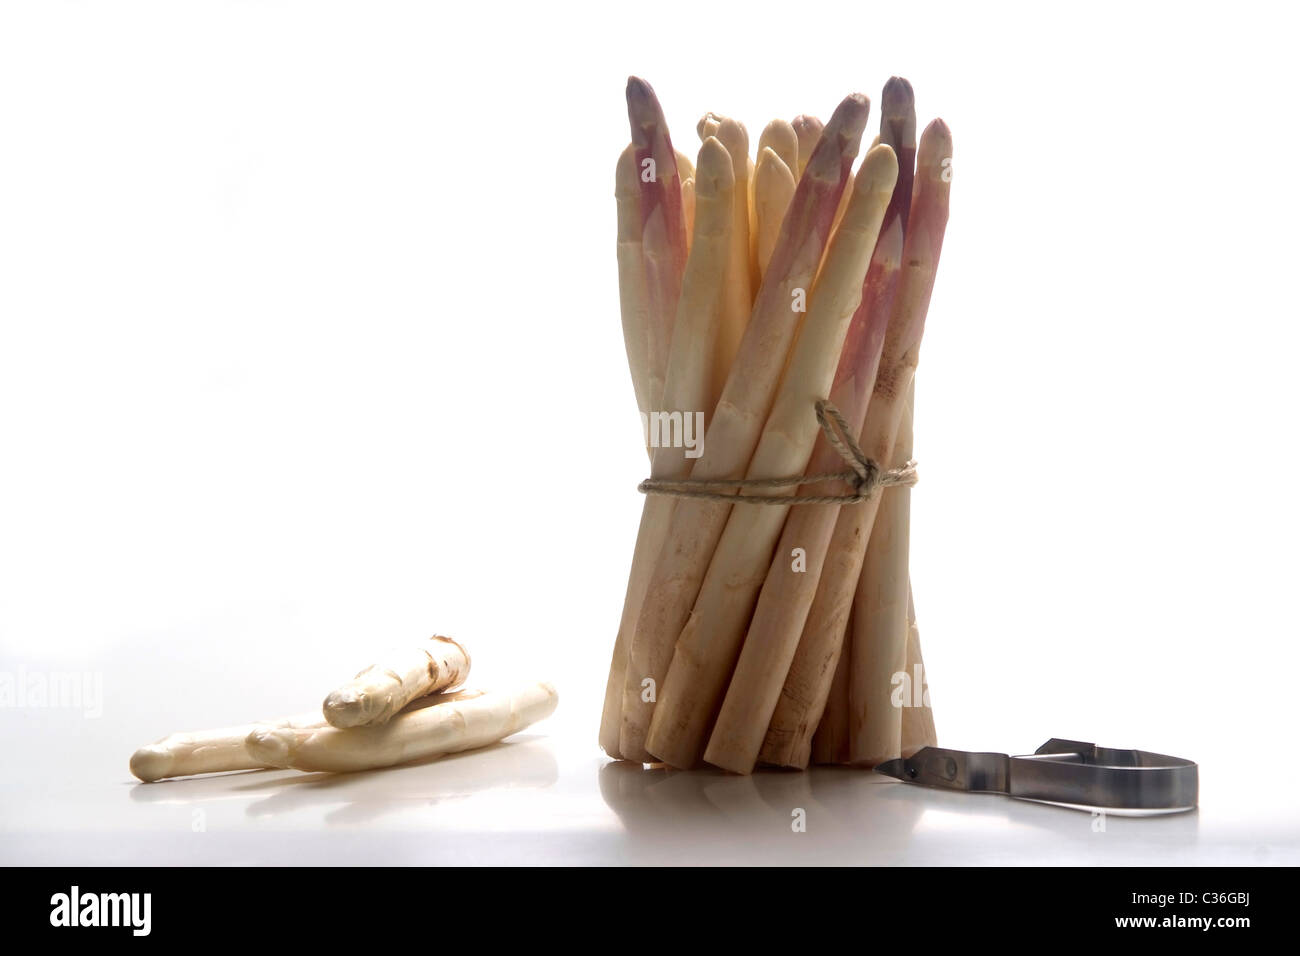 Bunch of white asparagus, standing Stock Photo